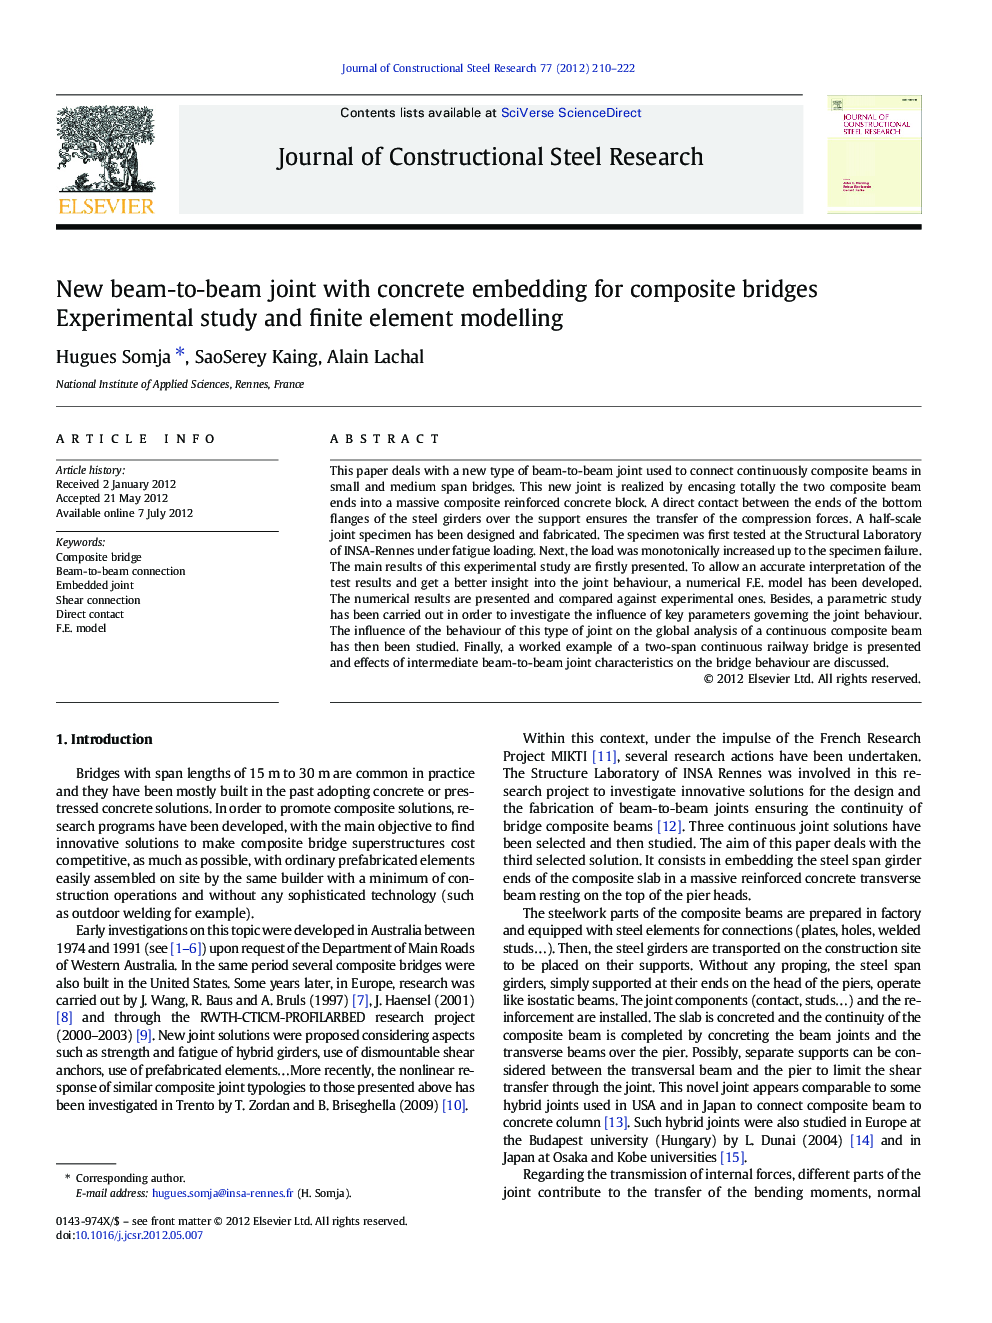 New beam-to-beam joint with concrete embedding for composite bridges: Experimental study and finite element modelling